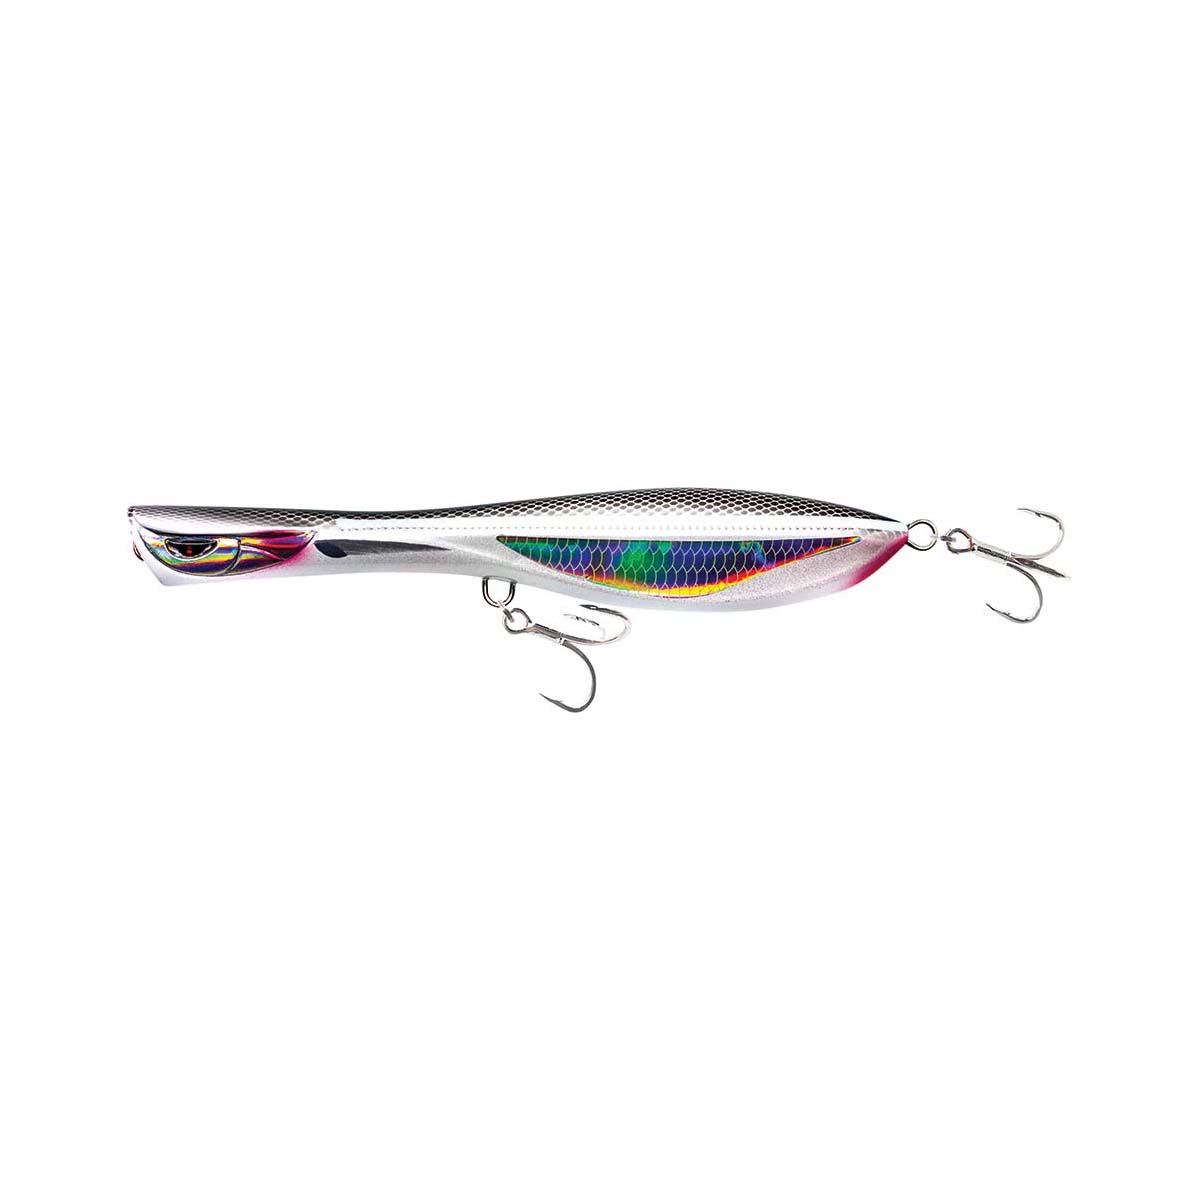 Nomad Dartwing Surface Stickbait Lure 13cm F Bleeding Mullet